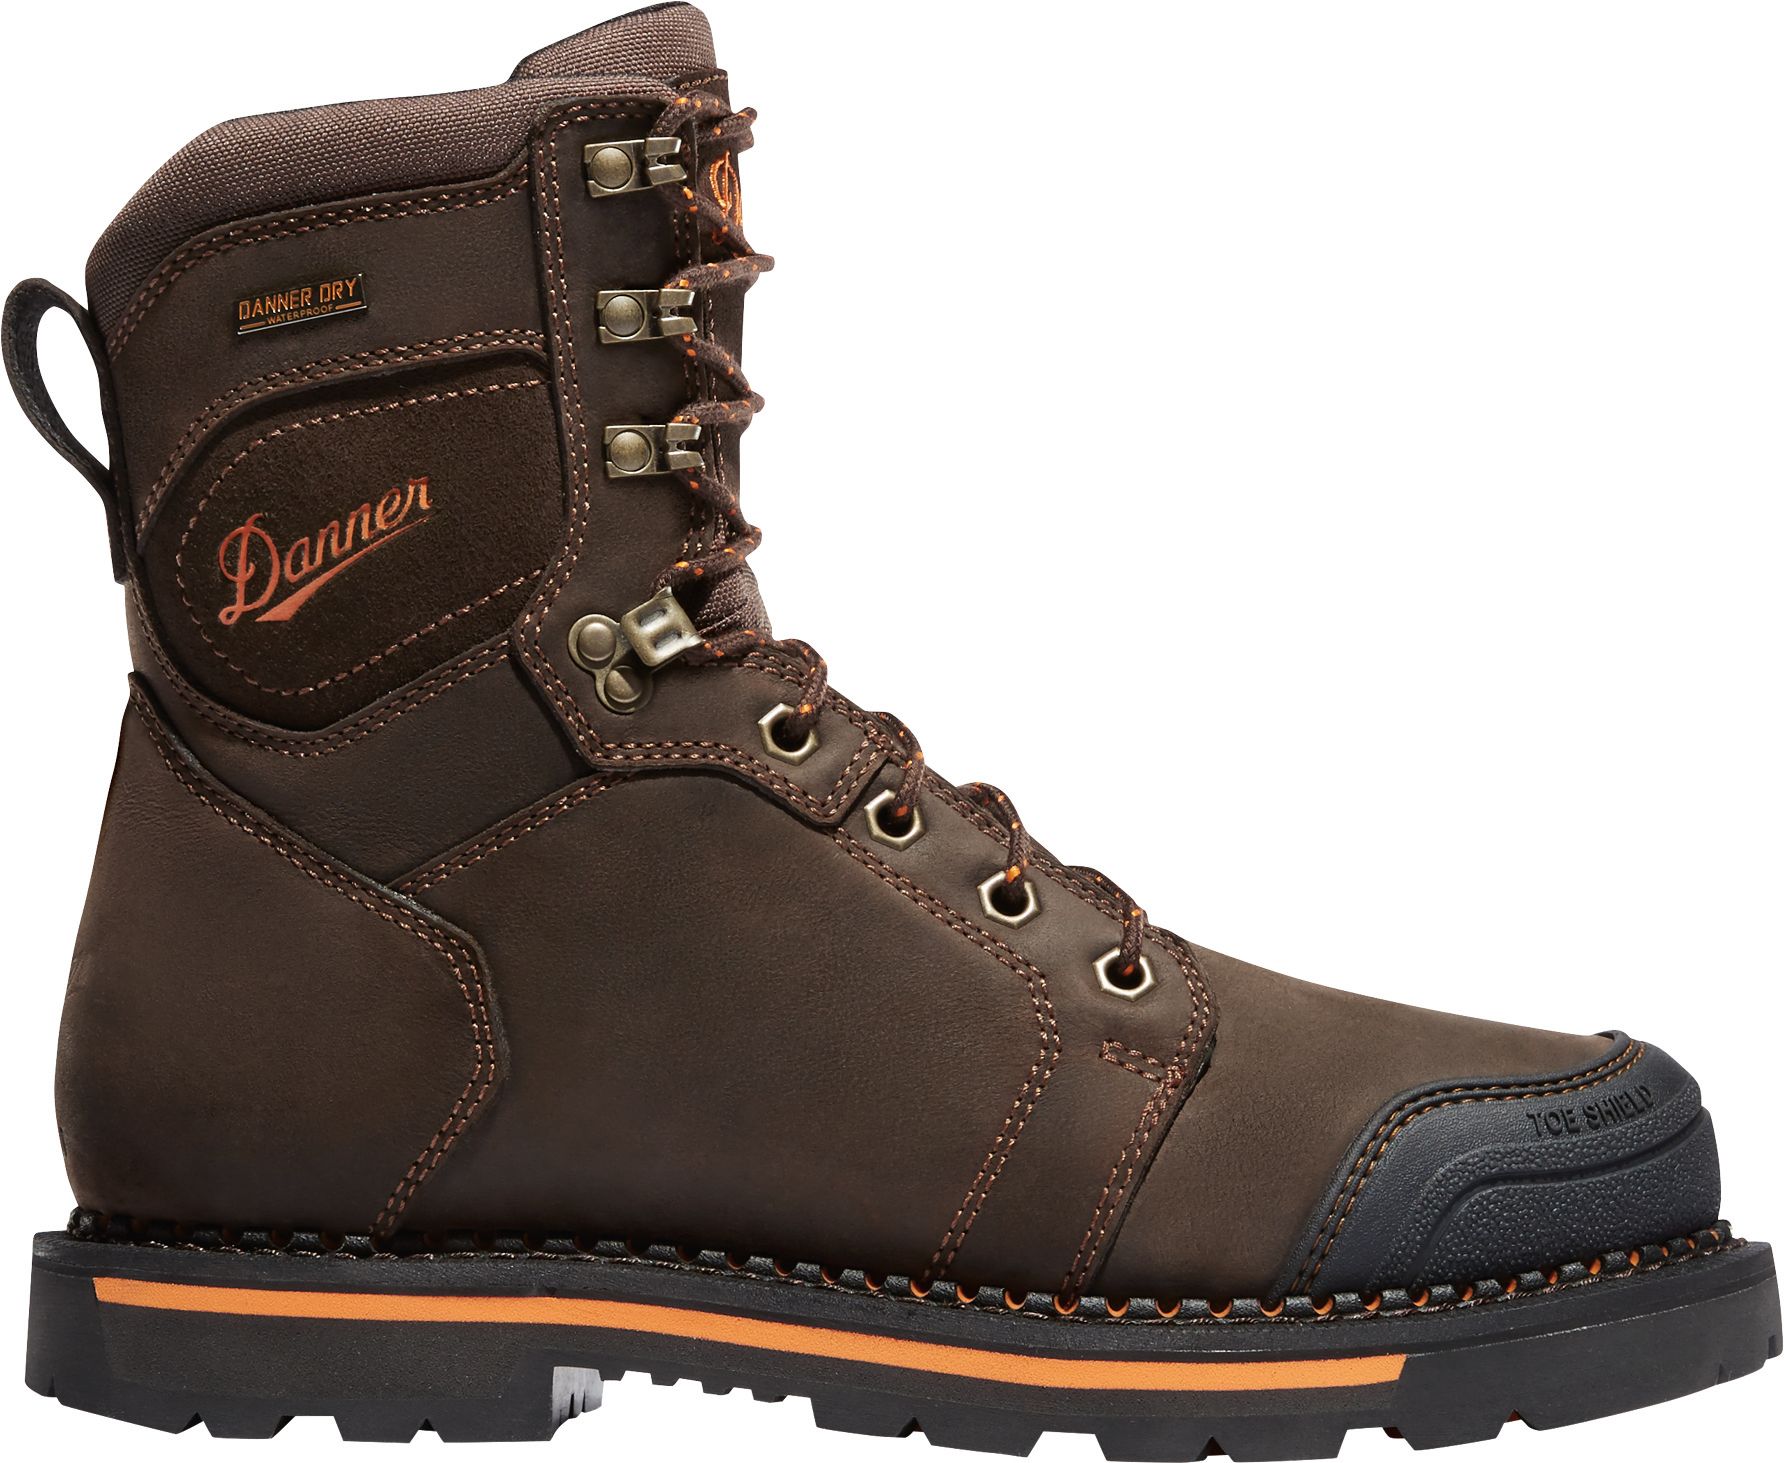 8 composite toe work boots